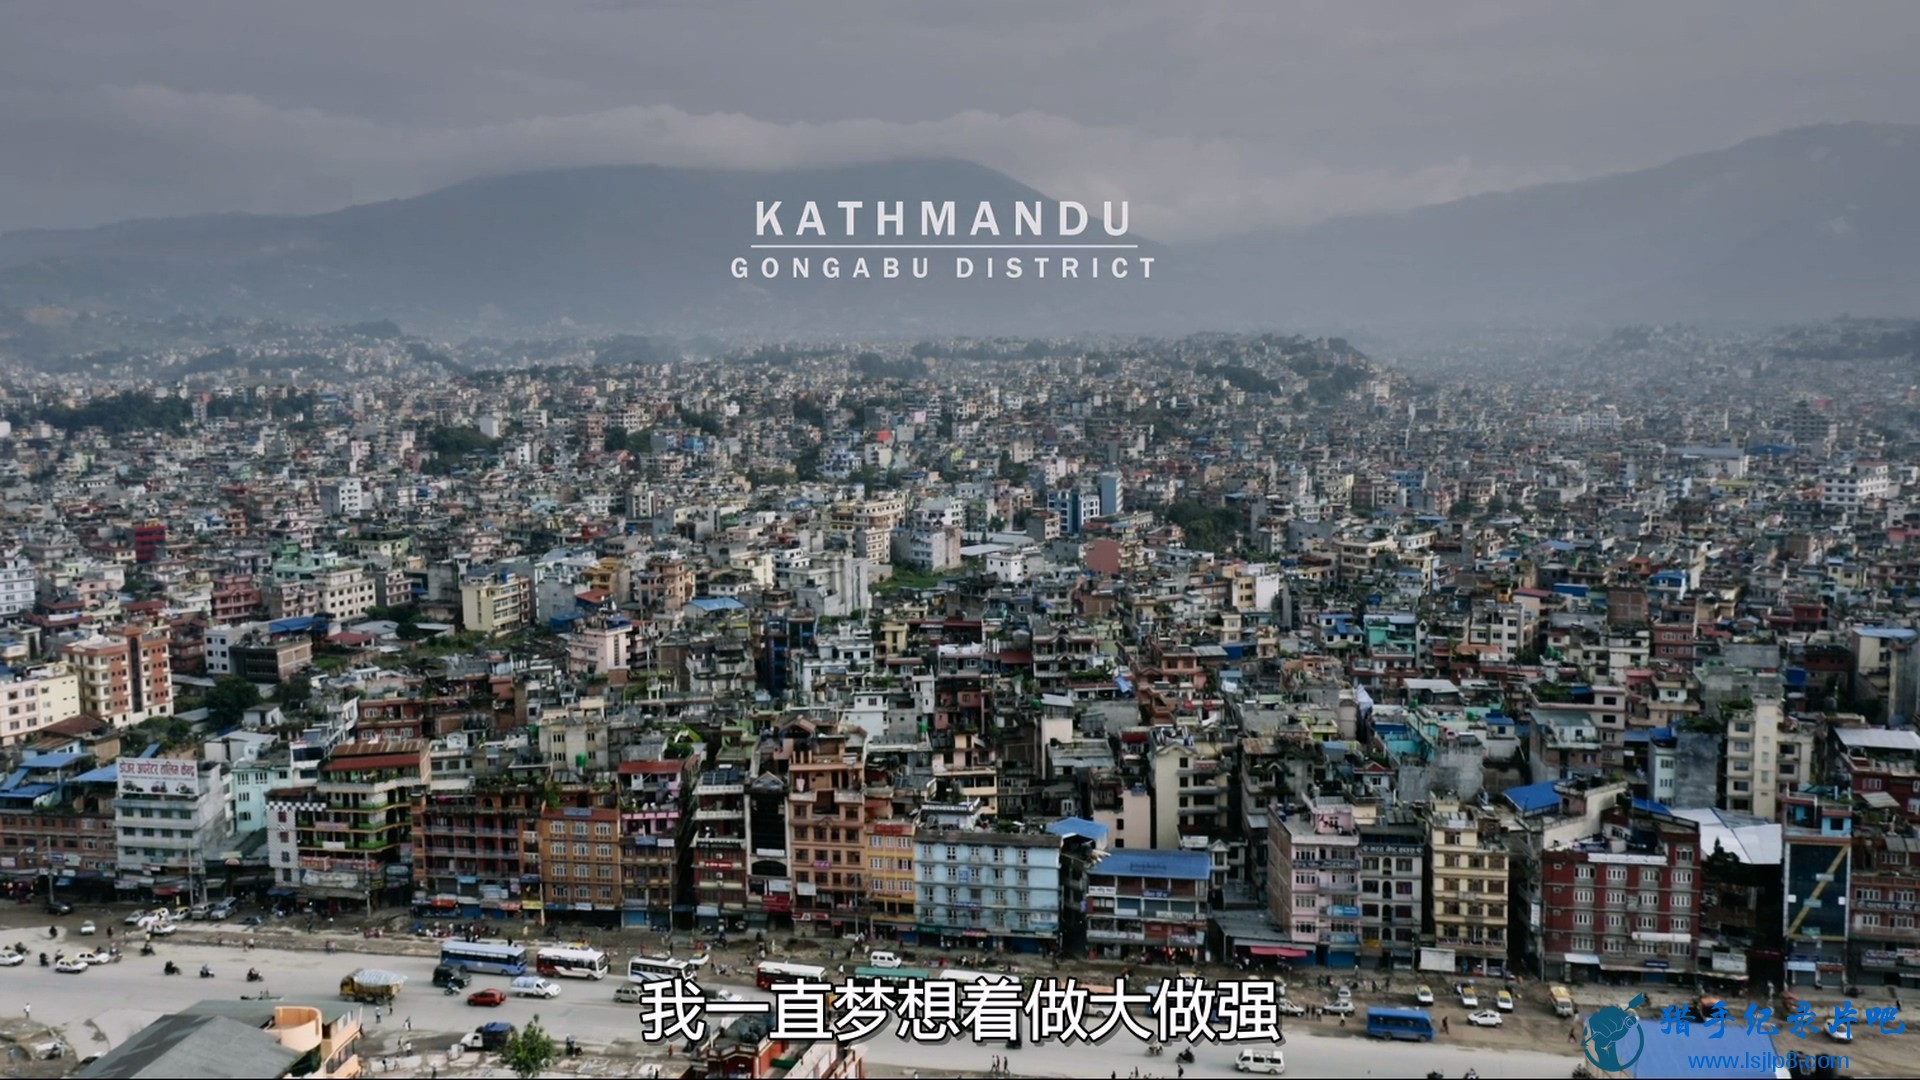 Aftershock.Everest.and.the.Nepal.Earthquake.S01E01.Wrong.Place.Wrong.Time.1080p..jpg